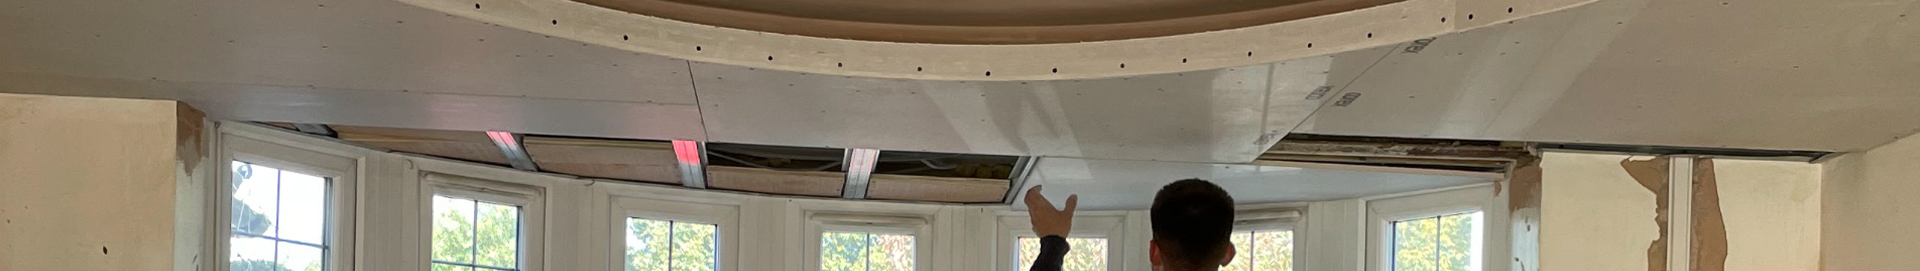 Suspended Ceiling Installation London